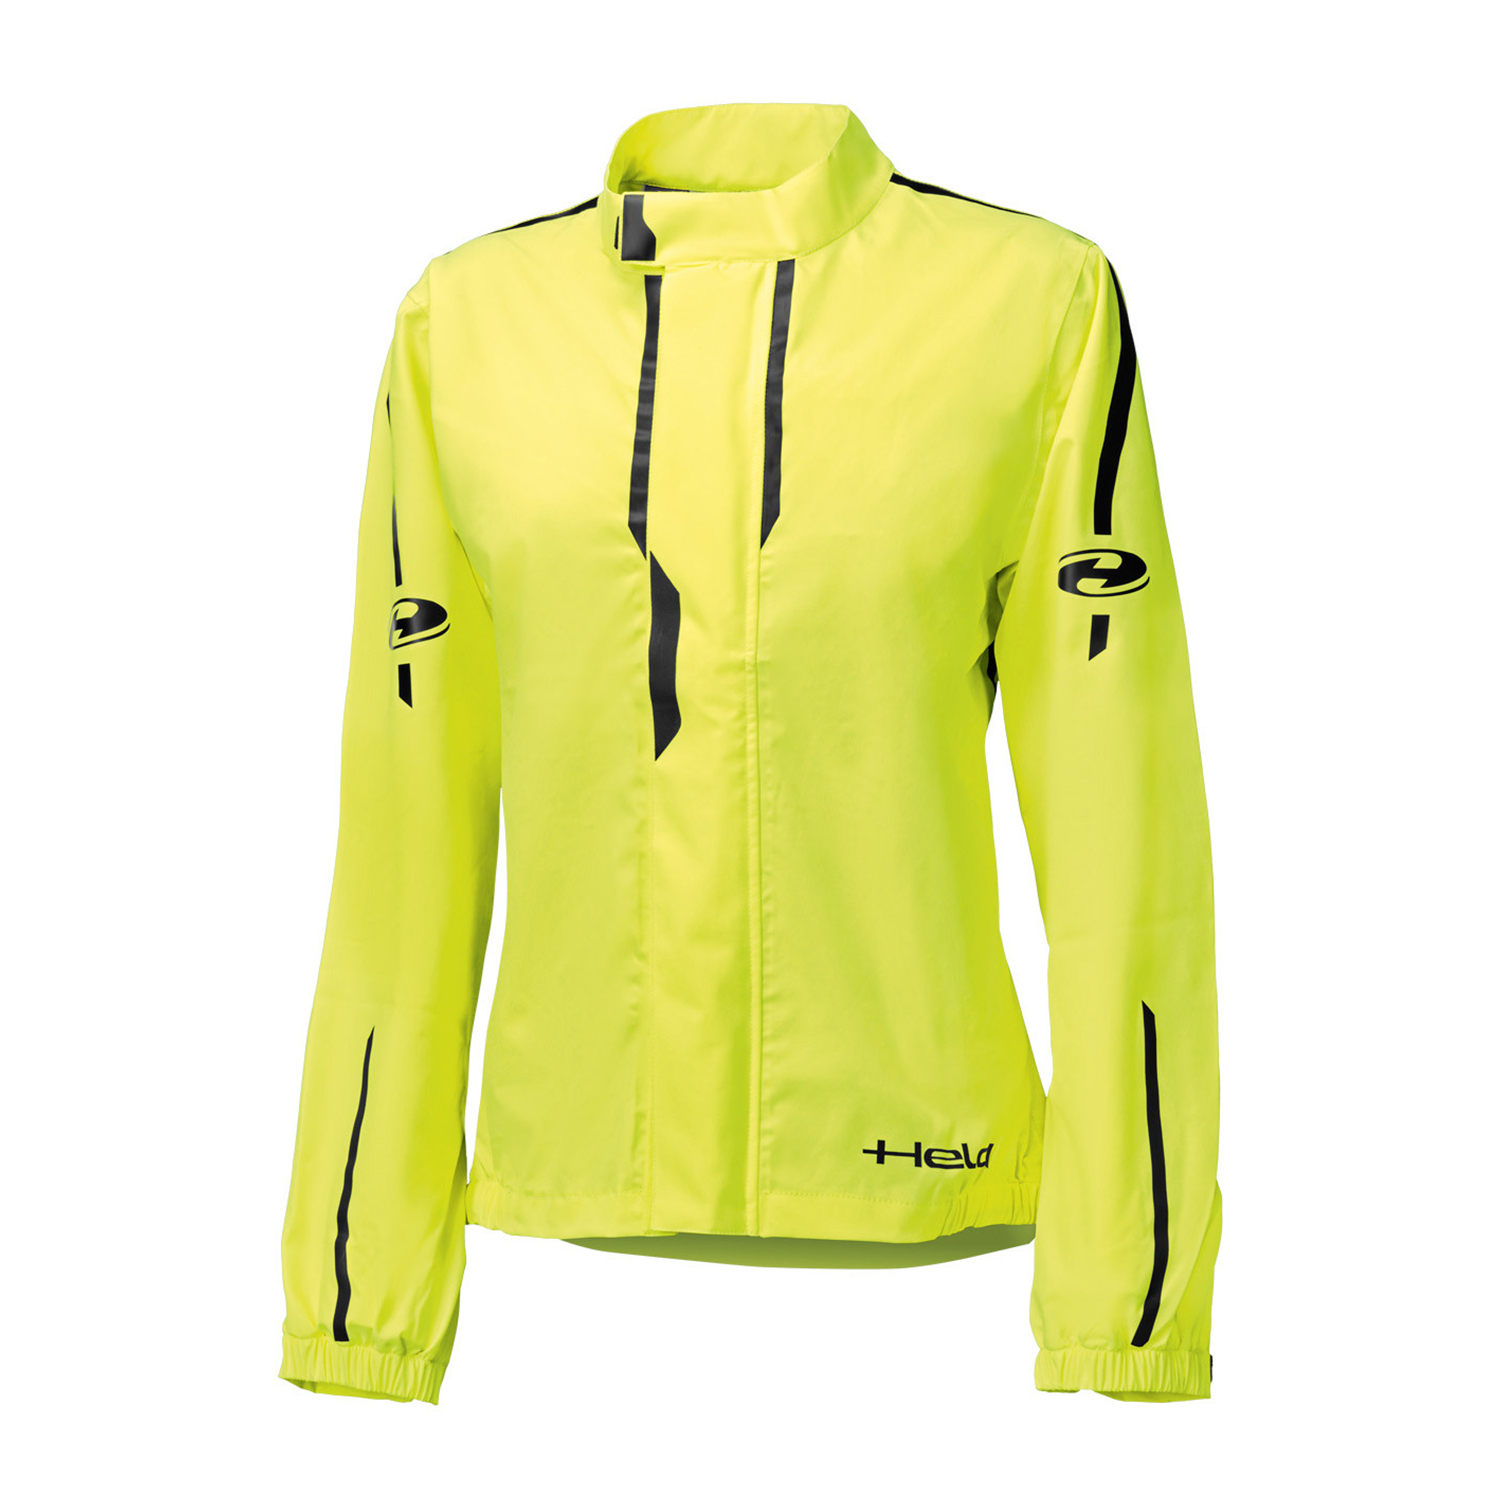 Held Rainstorm Top Womens Fluorescent Yellow-Black - Available in Various Sizes